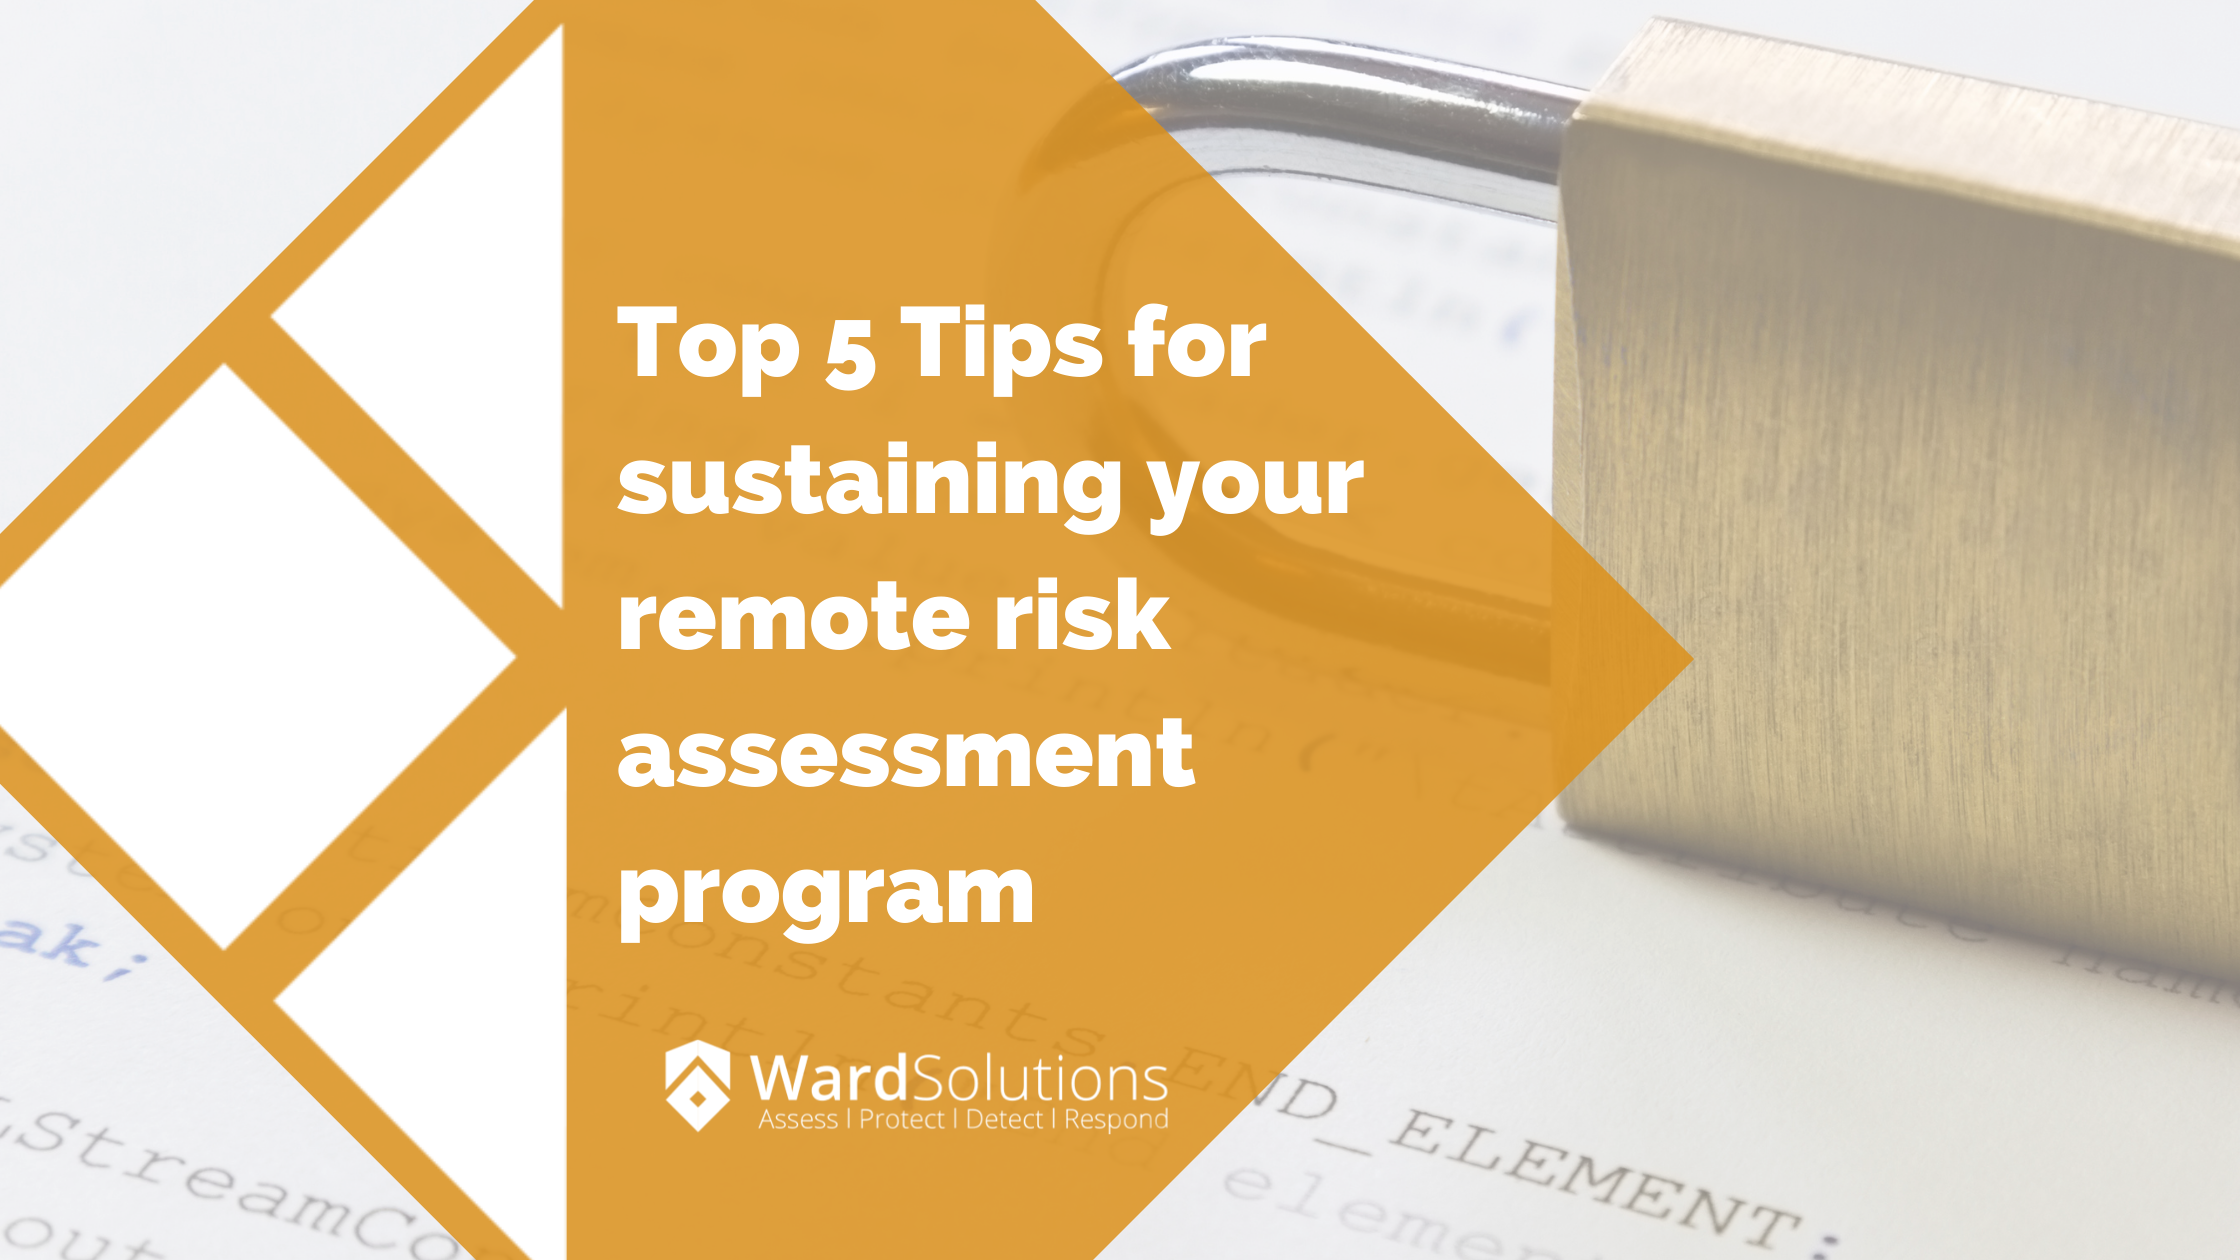 Top 5 Tips for sustaining your remote risk assessment program